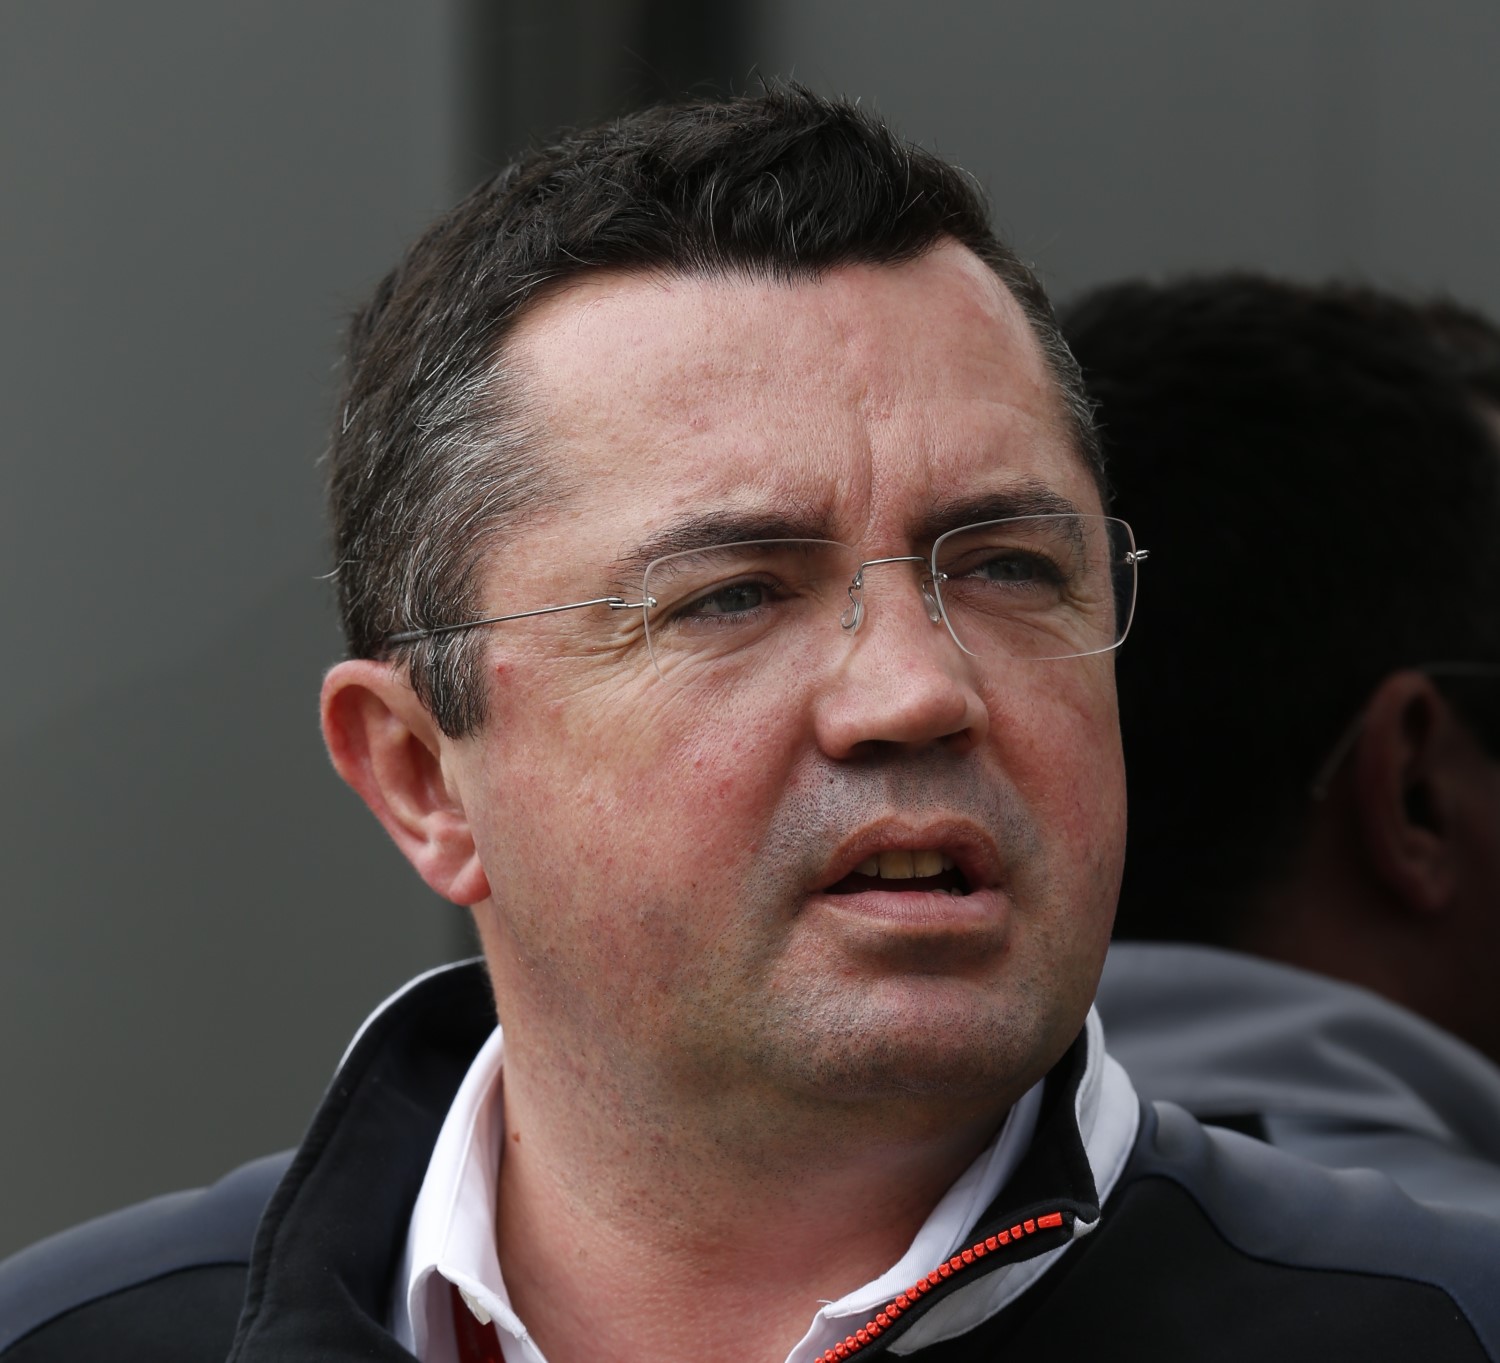 Boullier has failed in F1 everywhere he has worked